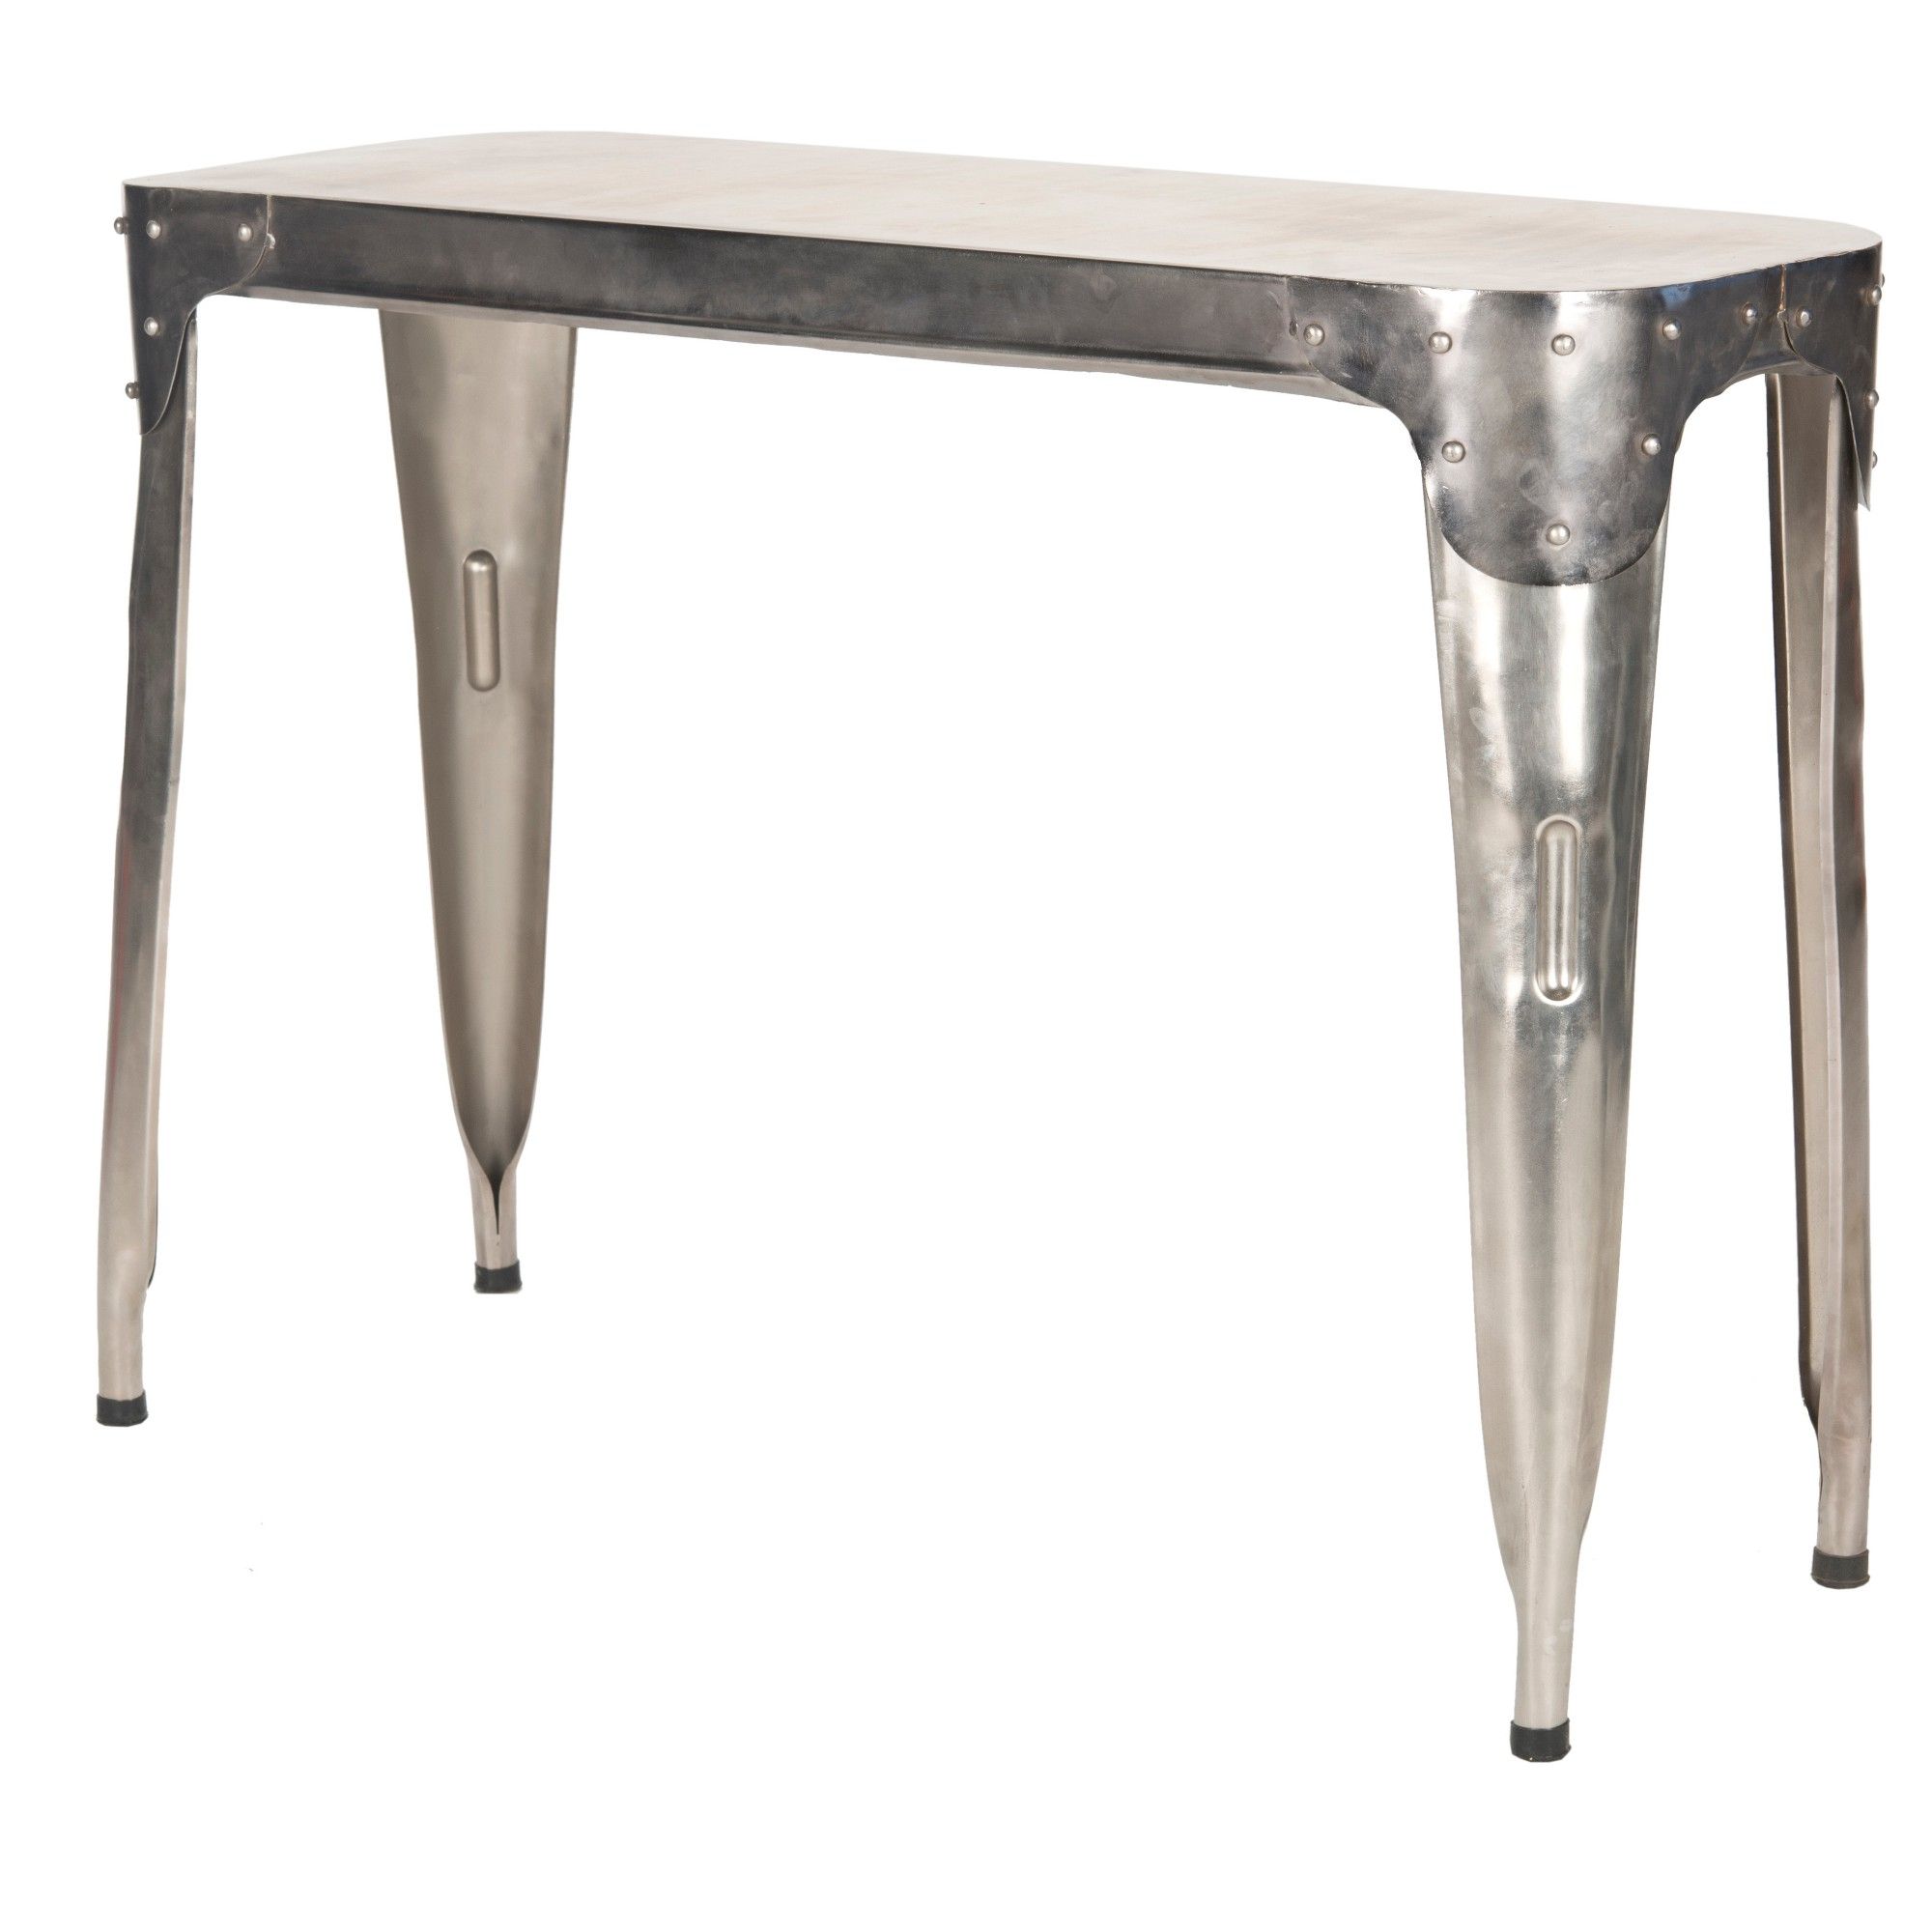 Console Pertaining To Parsons White Marble Top & Dark Steel Base 48x16 Console Tables (View 4 of 20)